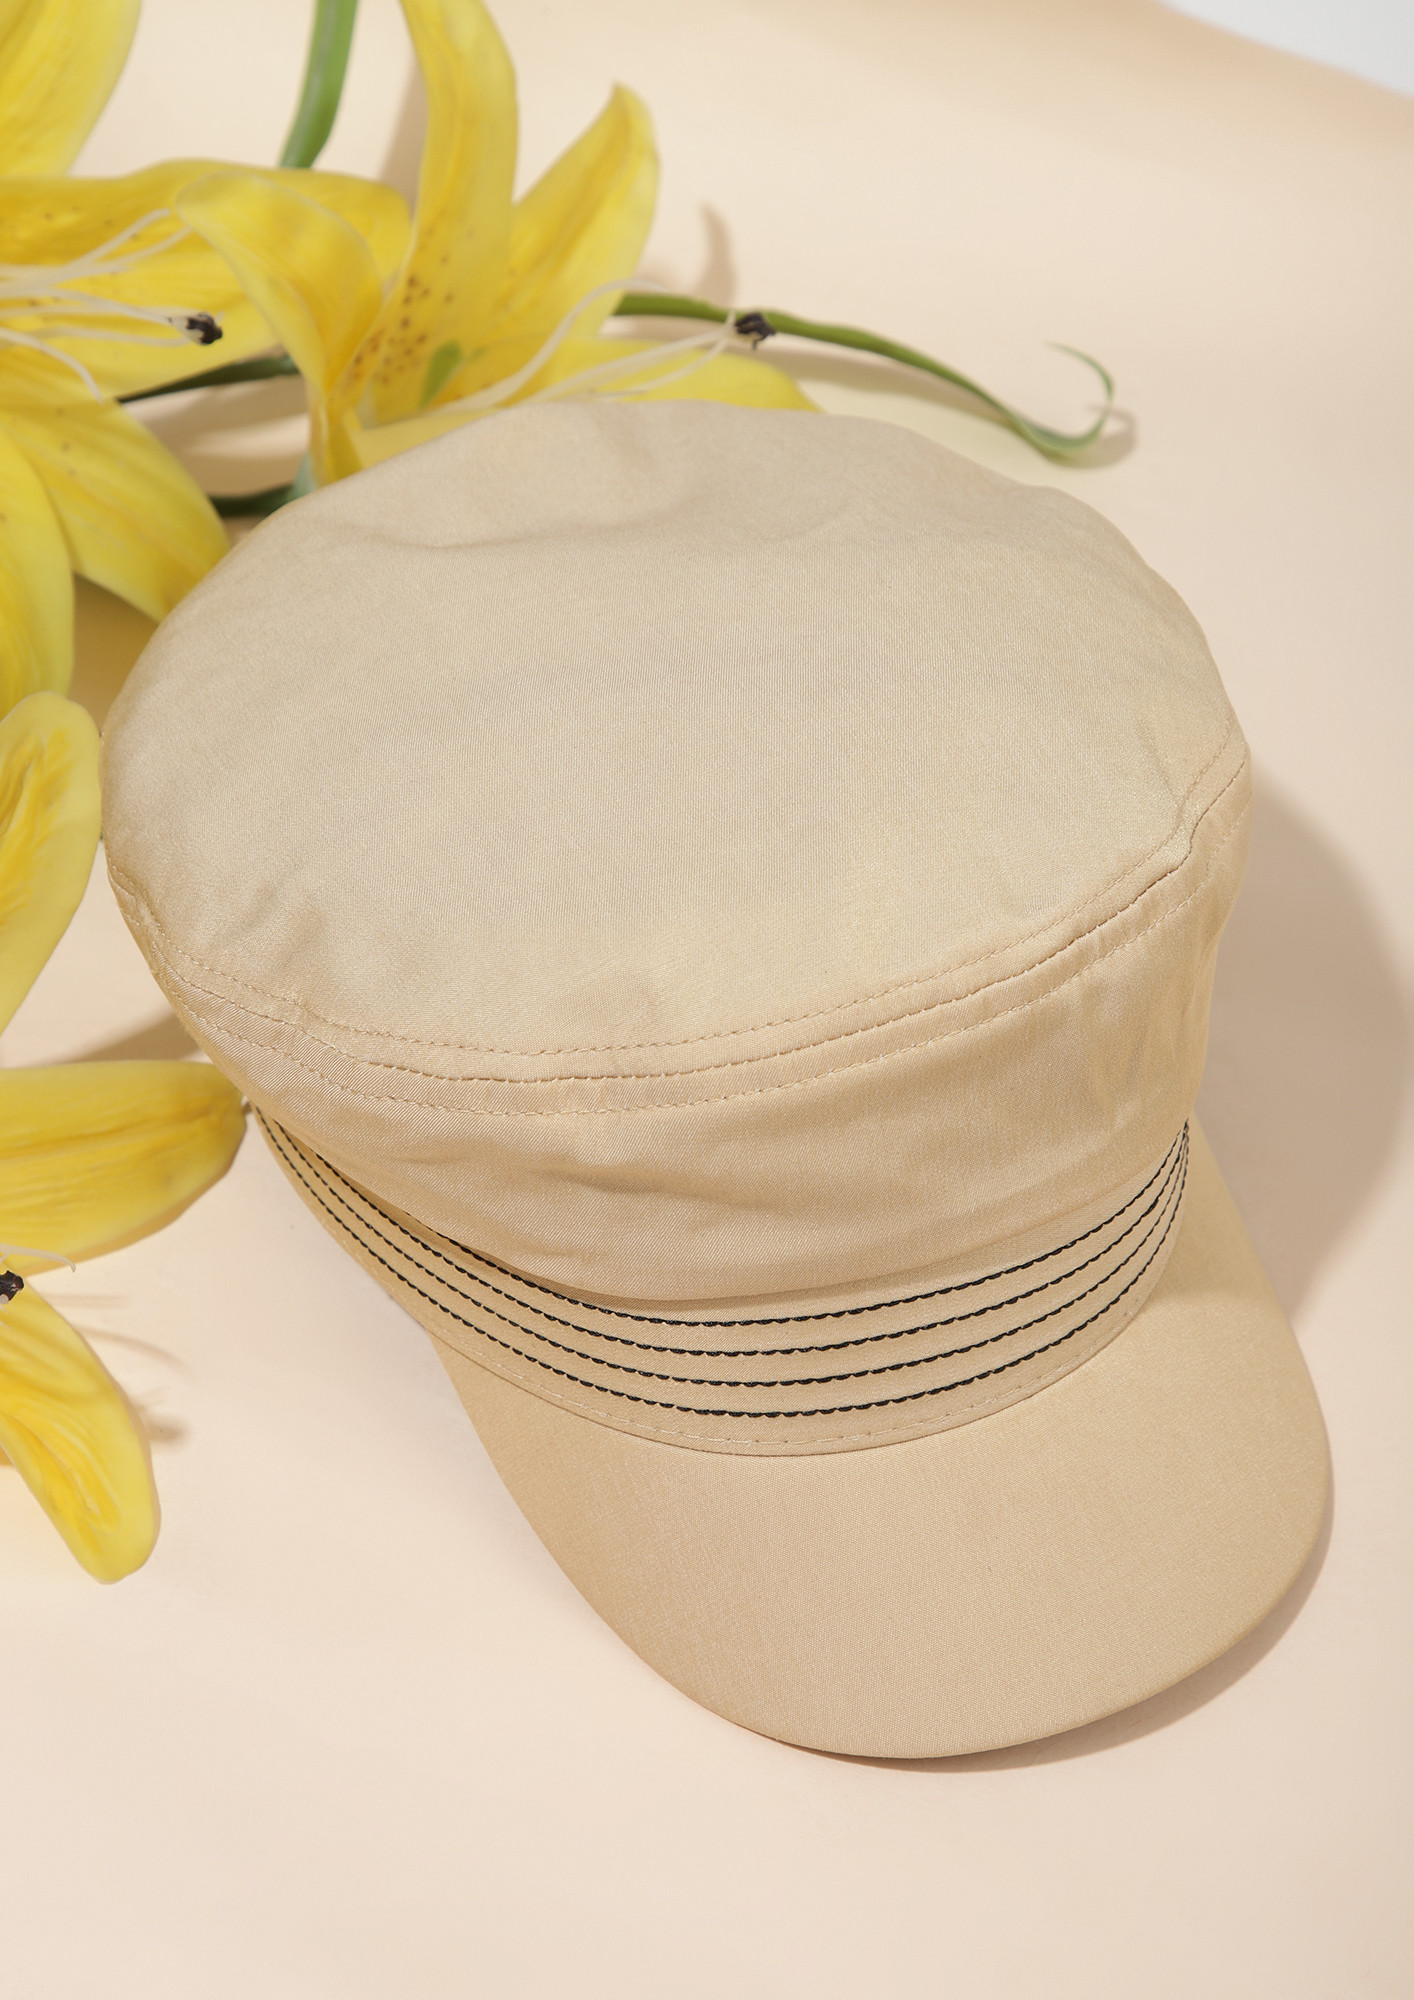 ROUND UP THE LOOK YELLOW BAKER BOY CAP